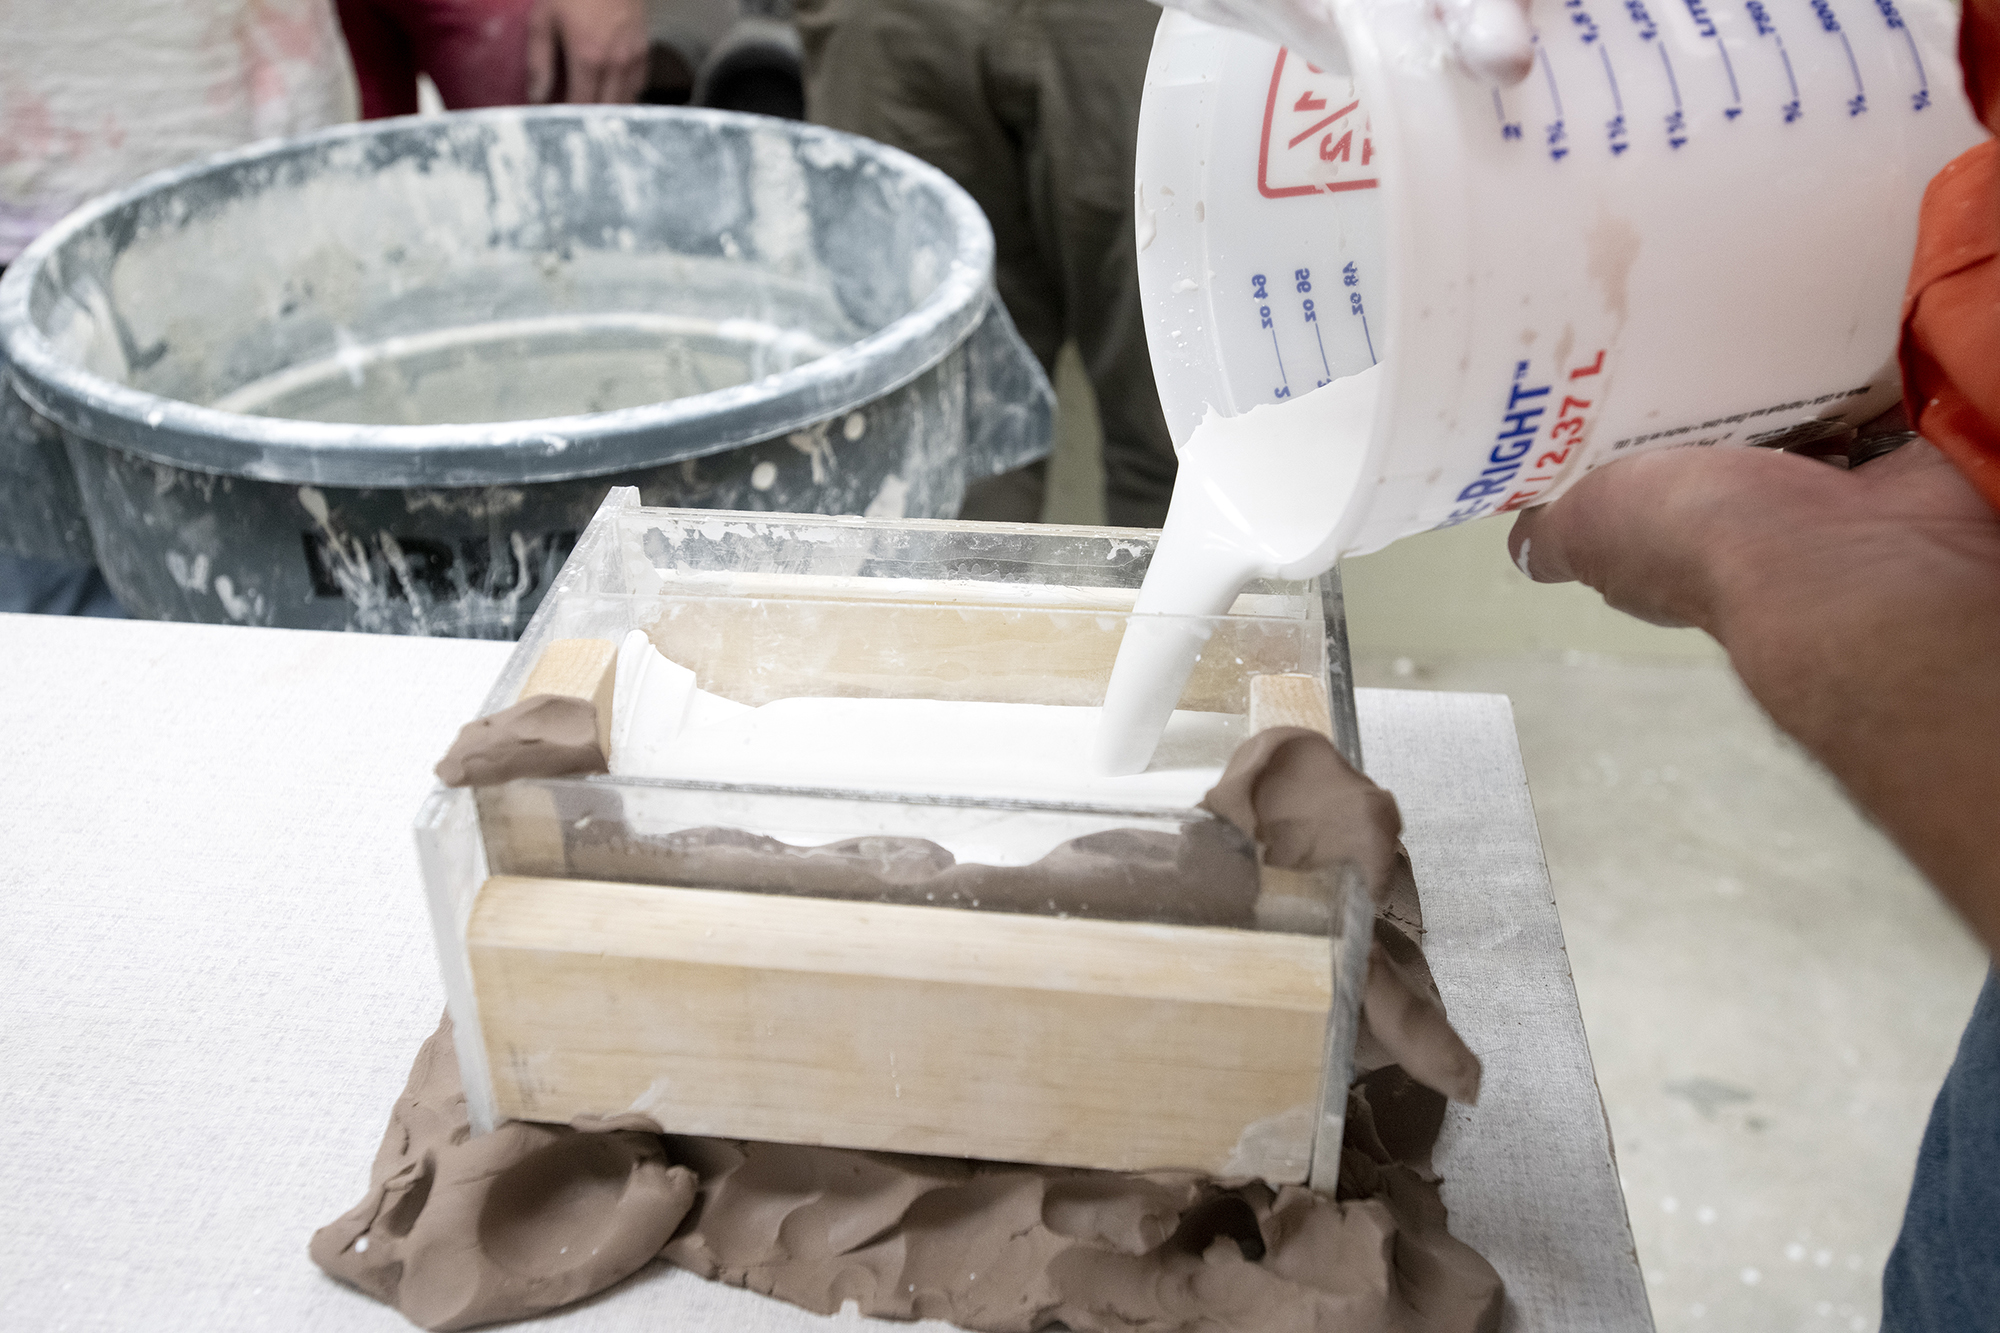 Plaster is poured into a mold system.